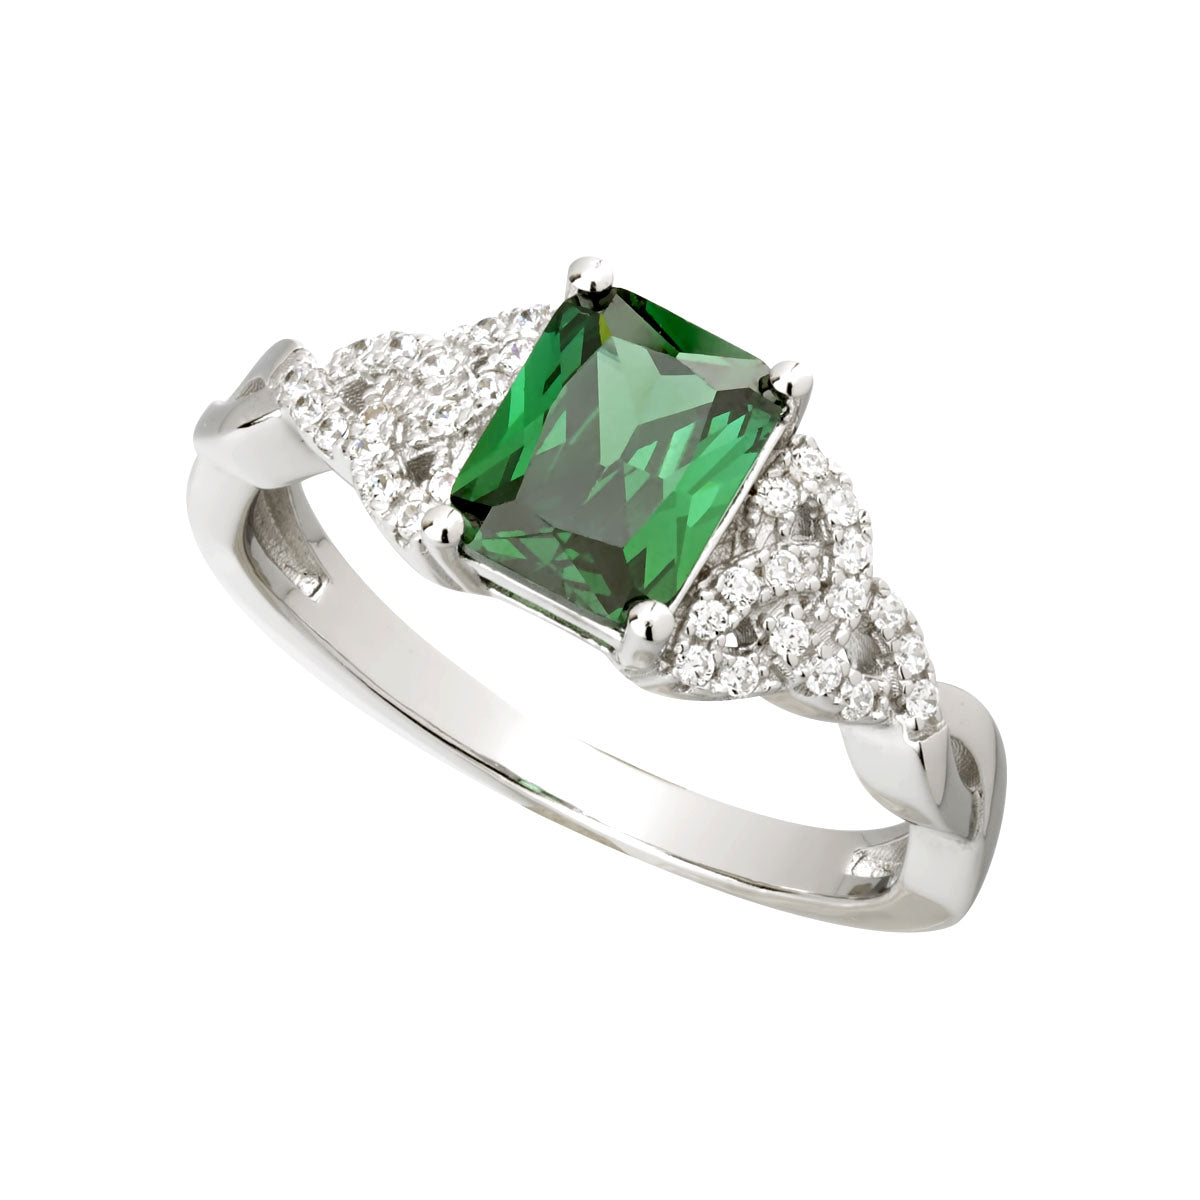 ladies sterling silver green crystal trinity knot ring s21040 from Solvar